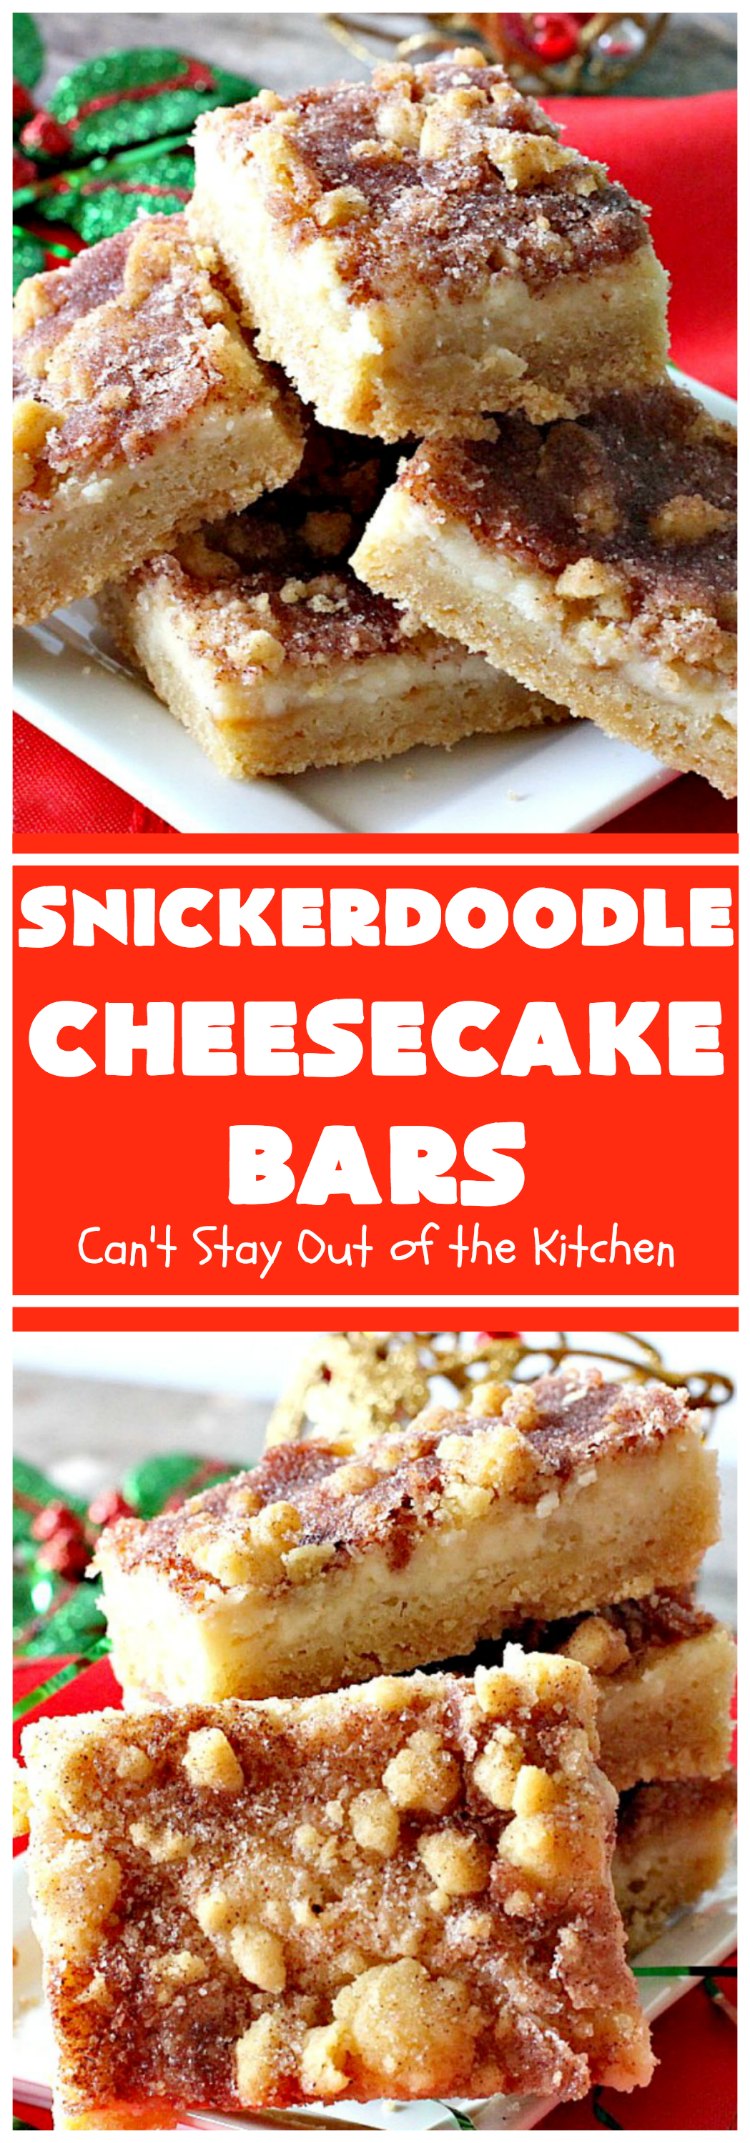 Snickerdoodle Cheesecake Bars | Can't Stay Out of the Kitchen